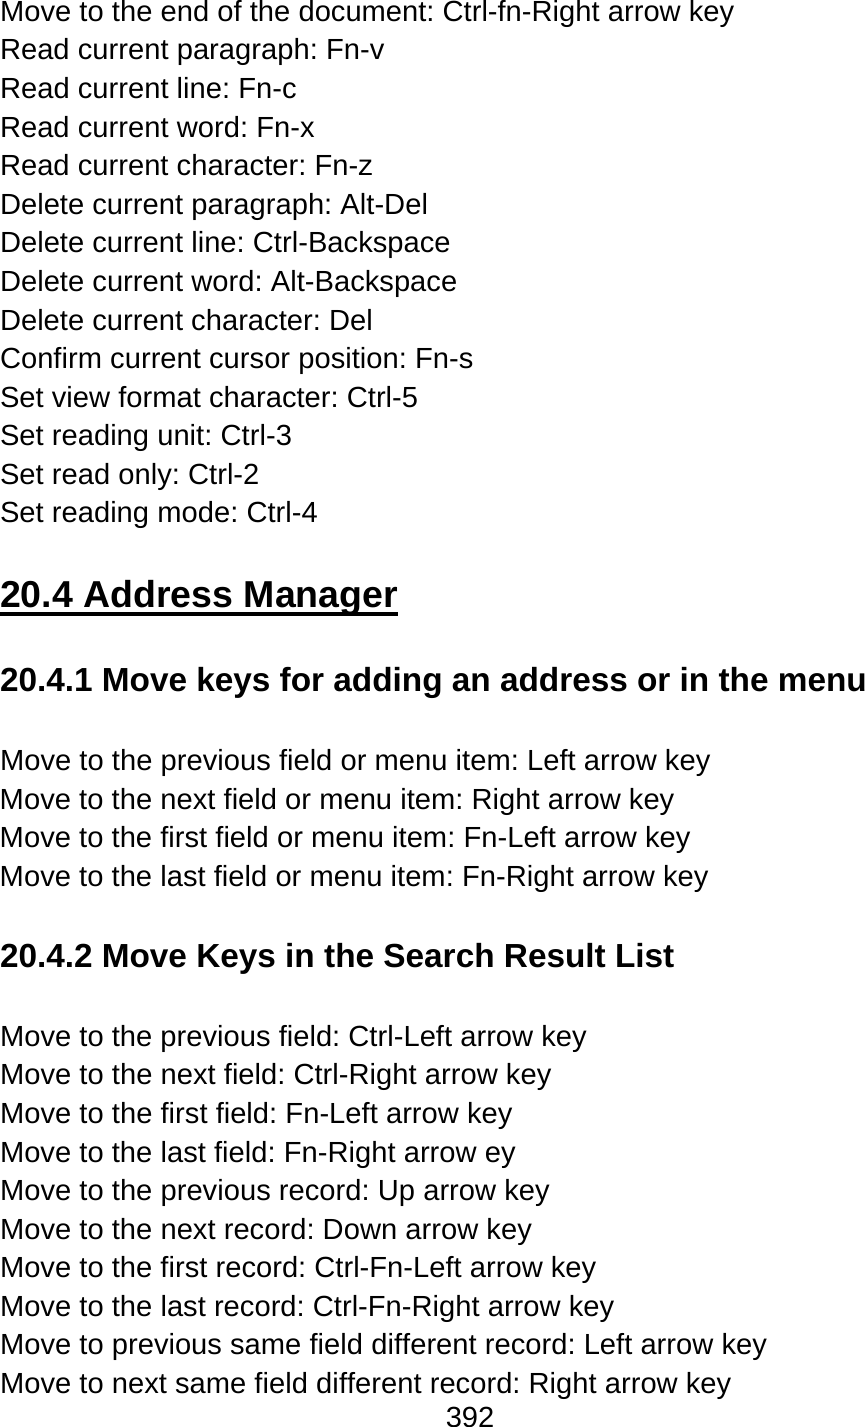 392  Move to the end of the document: Ctrl-fn-Right arrow key Read current paragraph: Fn-v Read current line: Fn-c Read current word: Fn-x Read current character: Fn-z Delete current paragraph: Alt-Del Delete current line: Ctrl-Backspace Delete current word: Alt-Backspace Delete current character: Del Confirm current cursor position: Fn-s Set view format character: Ctrl-5 Set reading unit: Ctrl-3 Set read only: Ctrl-2 Set reading mode: Ctrl-4  20.4 Address Manager  20.4.1 Move keys for adding an address or in the menu  Move to the previous field or menu item: Left arrow key Move to the next field or menu item: Right arrow key Move to the first field or menu item: Fn-Left arrow key Move to the last field or menu item: Fn-Right arrow key  20.4.2 Move Keys in the Search Result List  Move to the previous field: Ctrl-Left arrow key Move to the next field: Ctrl-Right arrow key Move to the first field: Fn-Left arrow key Move to the last field: Fn-Right arrow ey Move to the previous record: Up arrow key Move to the next record: Down arrow key Move to the first record: Ctrl-Fn-Left arrow key Move to the last record: Ctrl-Fn-Right arrow key Move to previous same field different record: Left arrow key Move to next same field different record: Right arrow key 